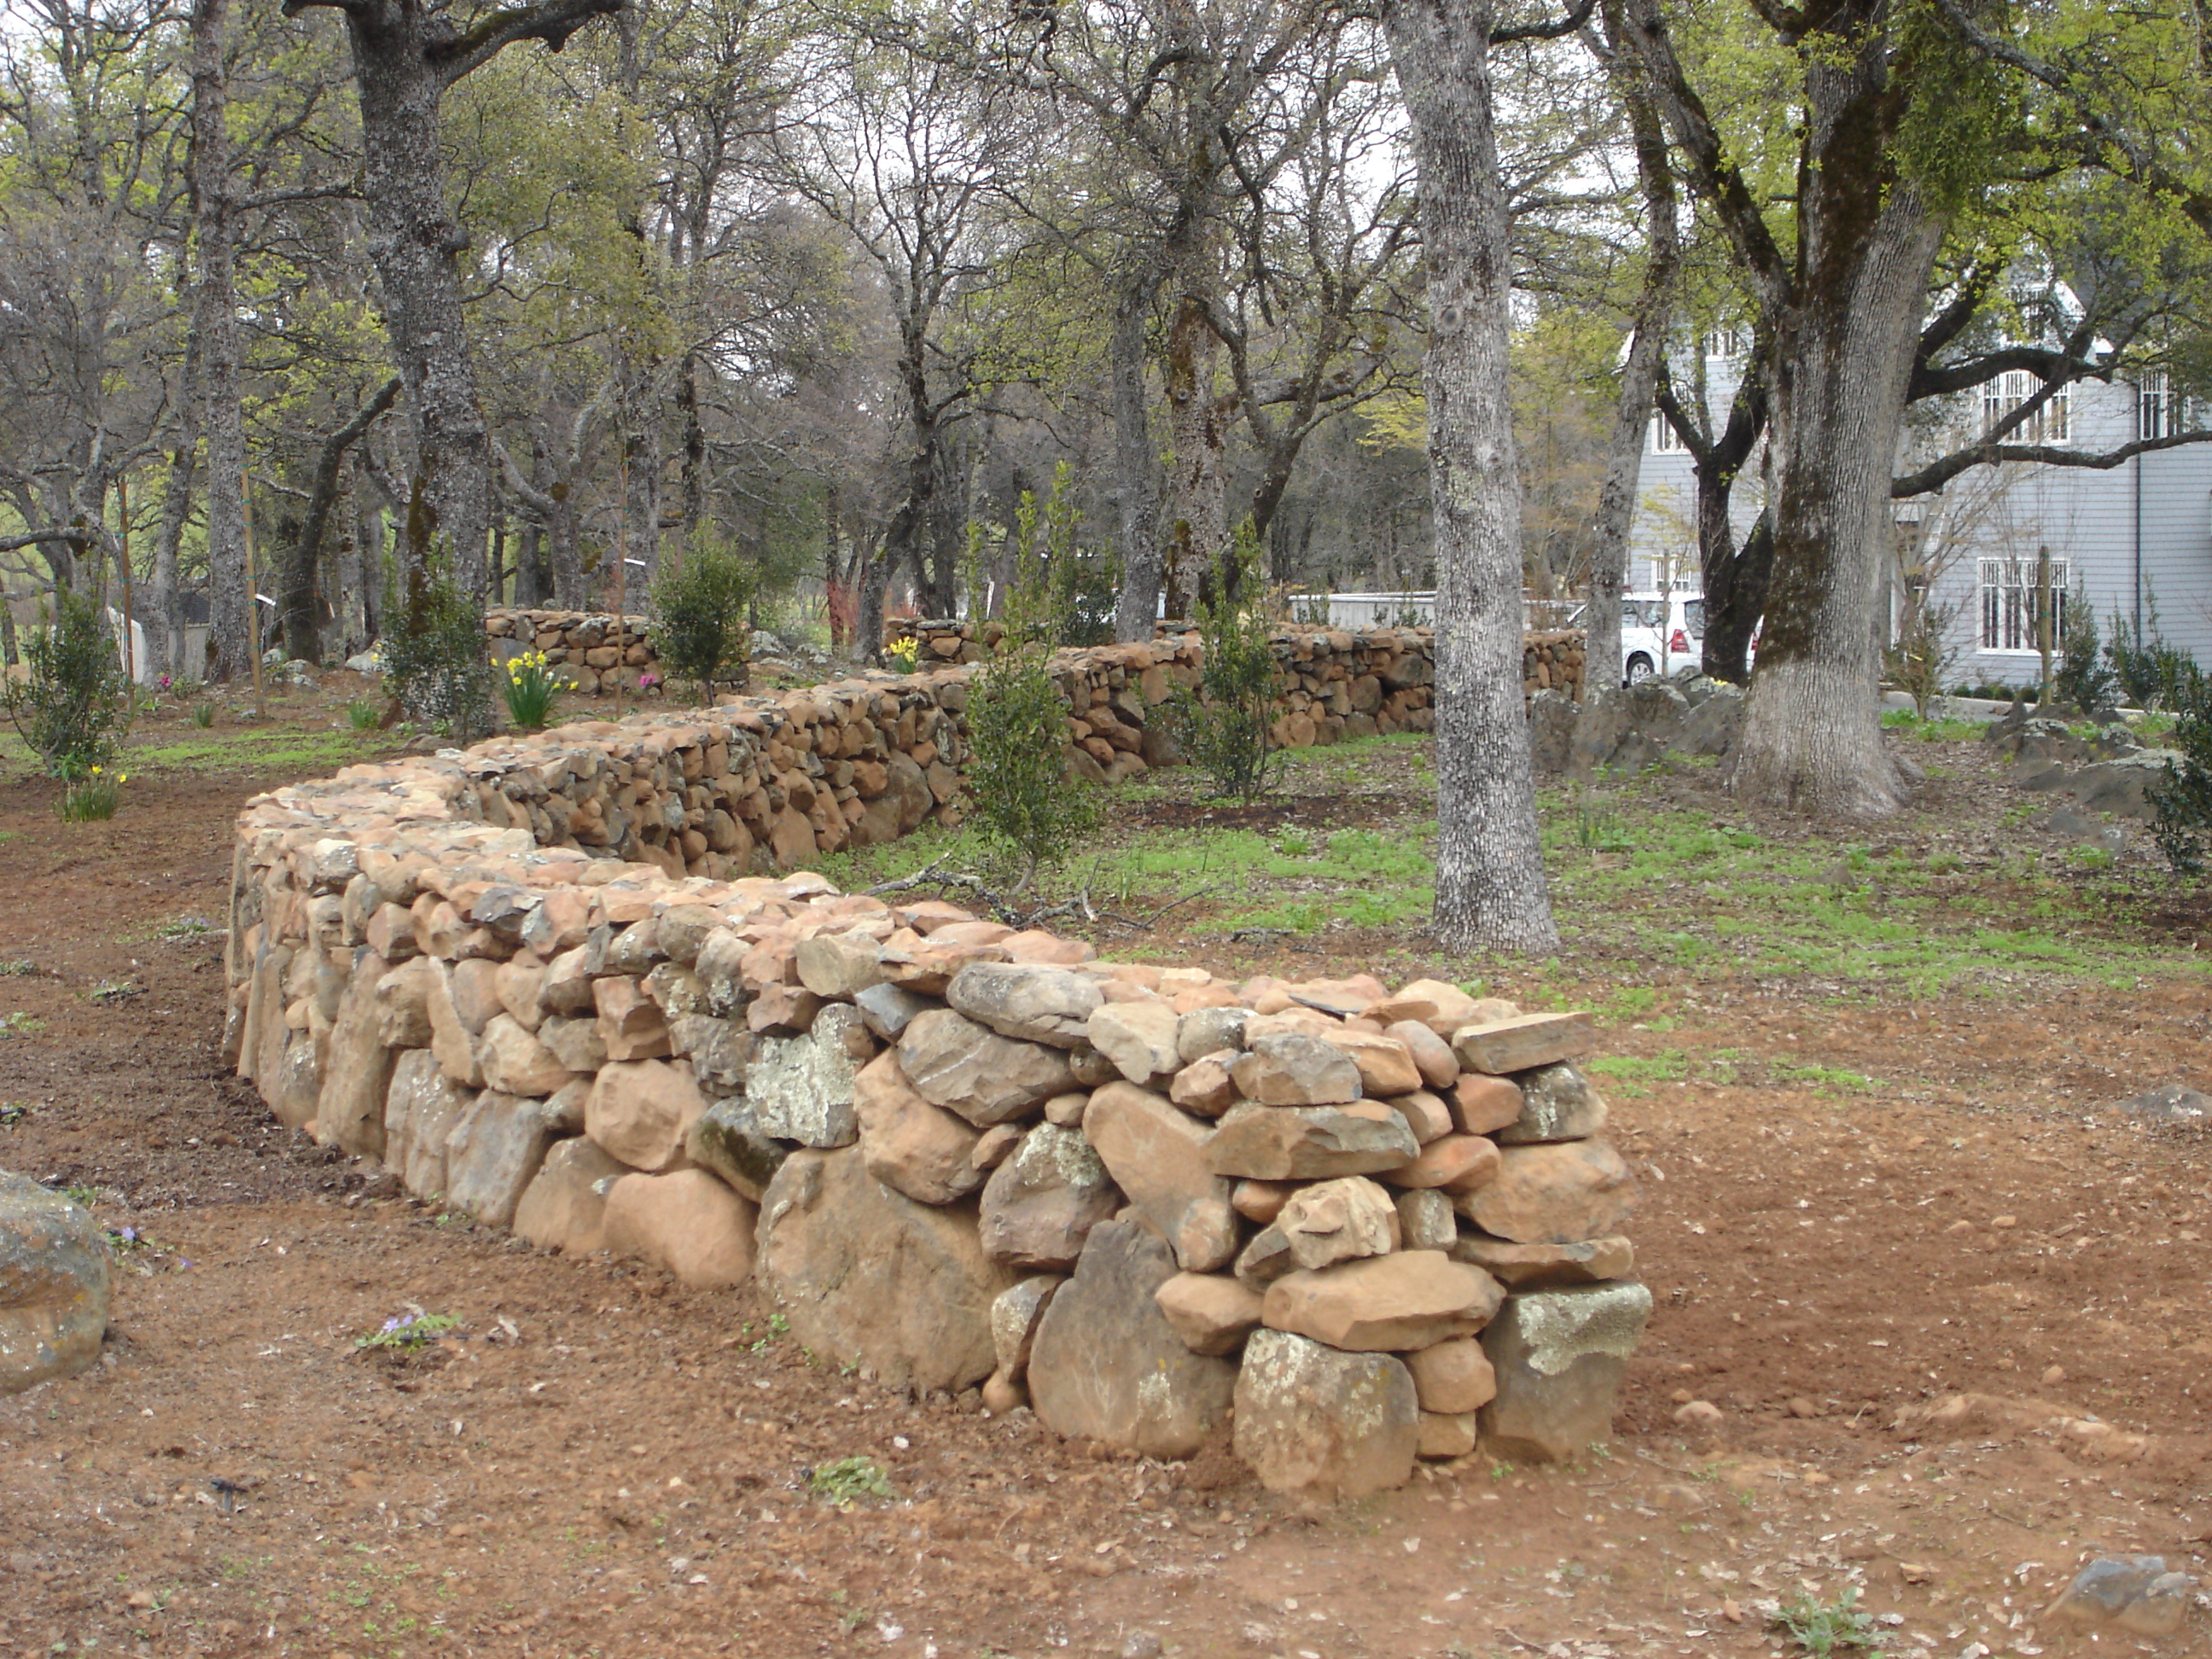 True dry stack stone fence - if only they would allow this in ...